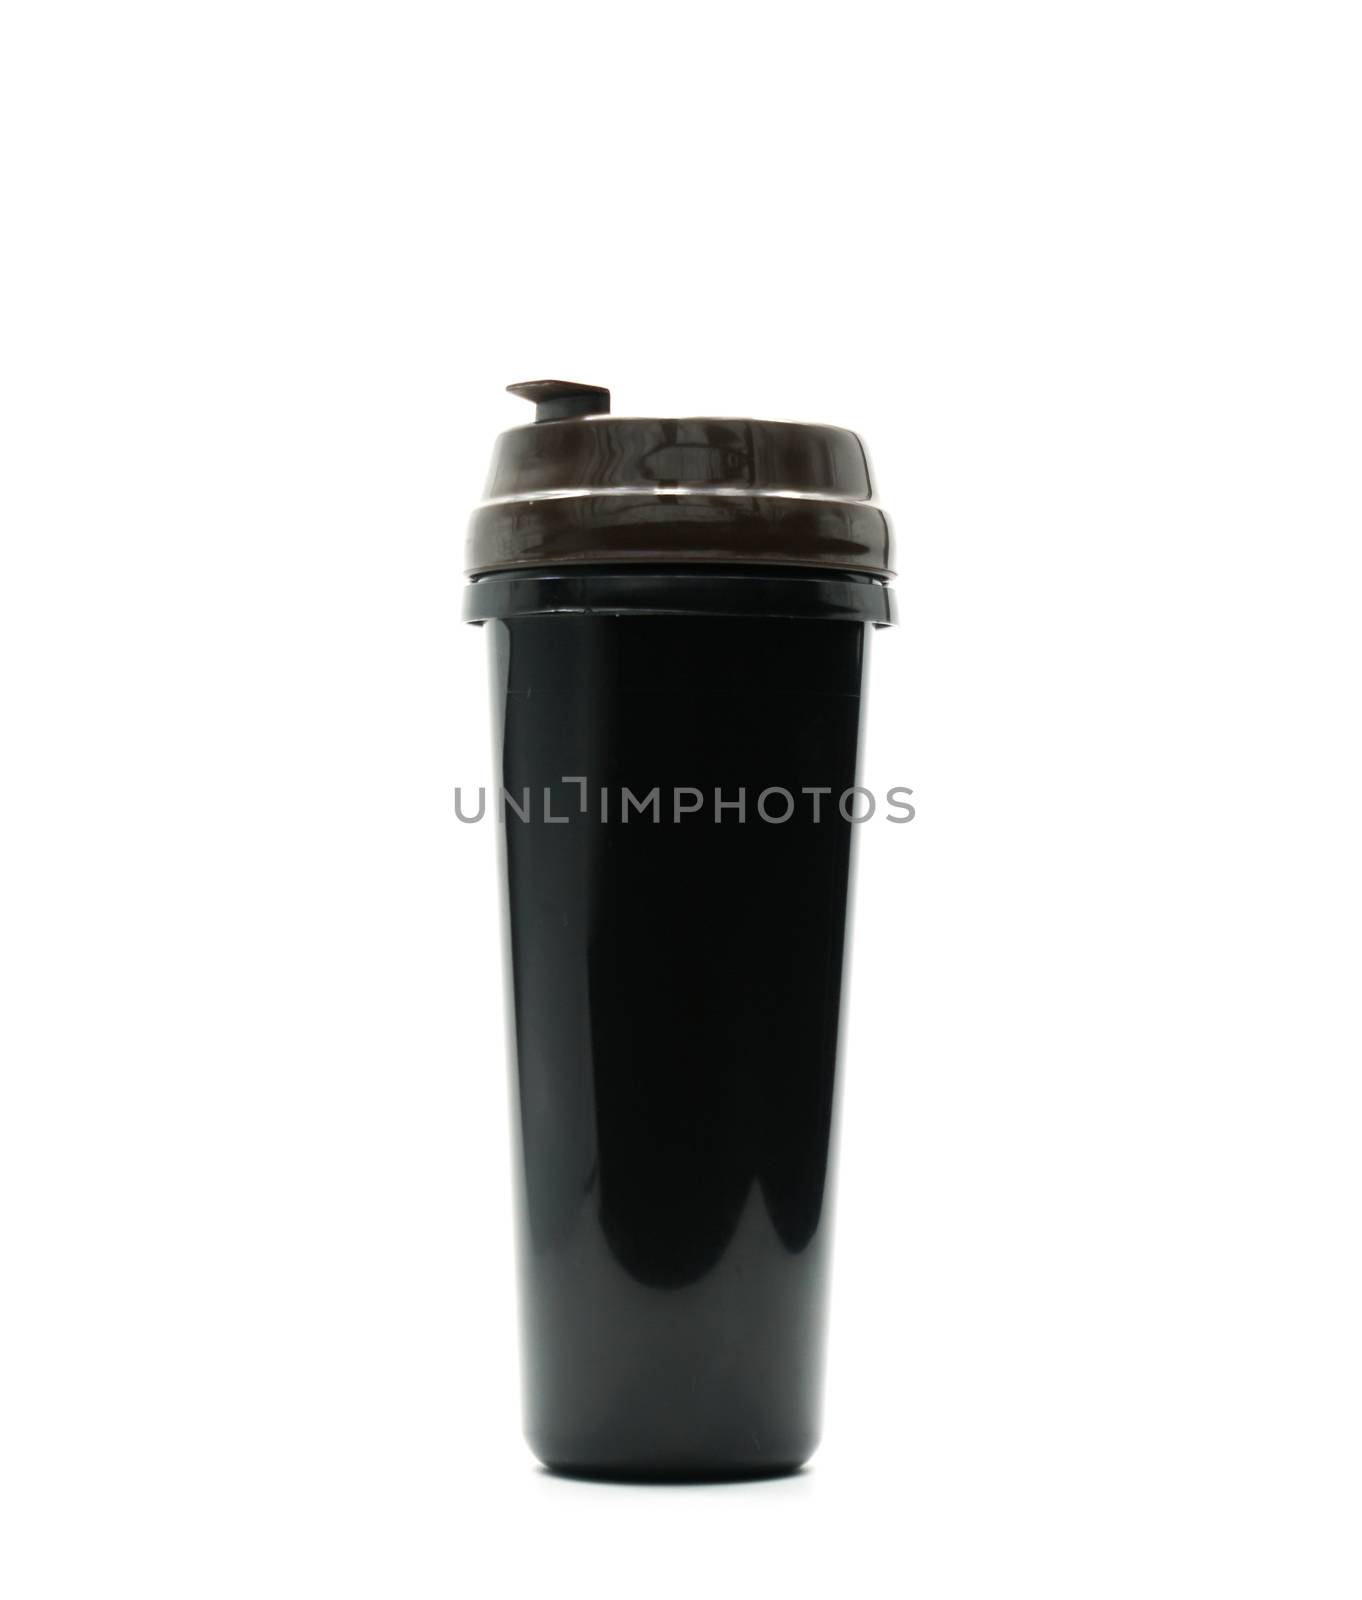 Black thermos bottle isolated on white background, just add your own text by Fahroni